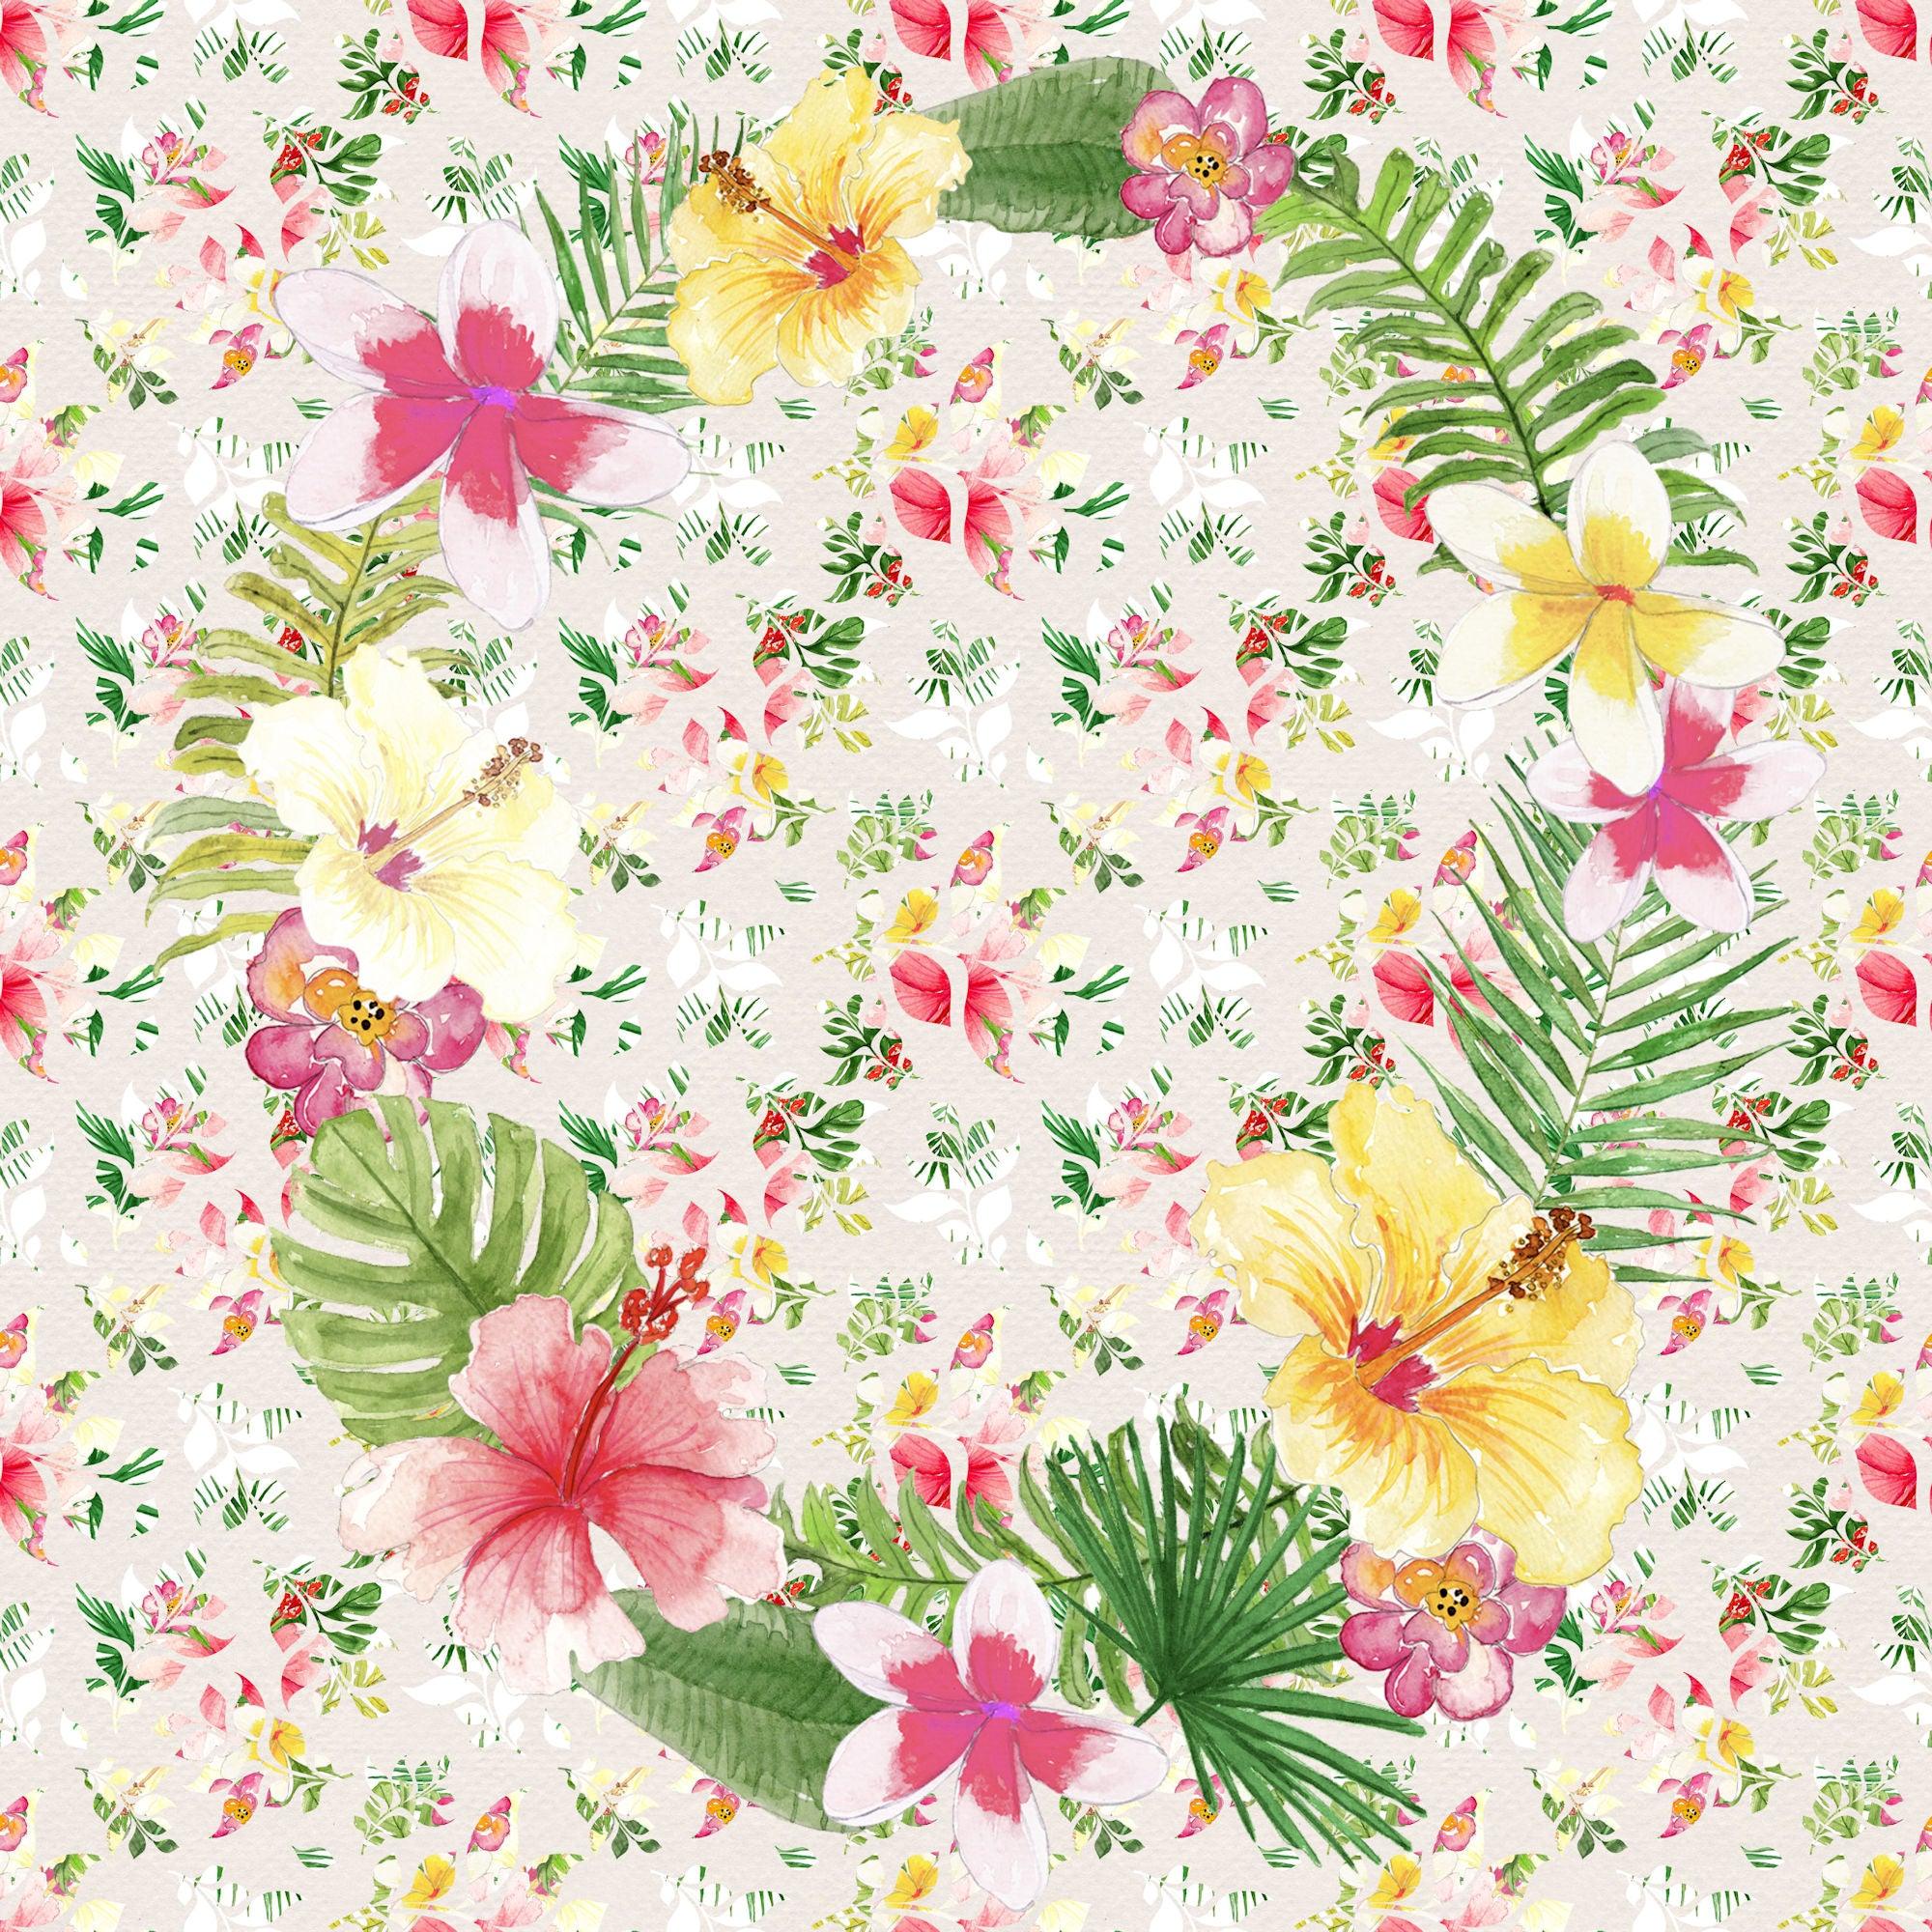 Aloha, Hawaii Collection Maui 12 x 12 Double-Sided Scrapbook Paper by SSC Designs - Scrapbook Supply Companies